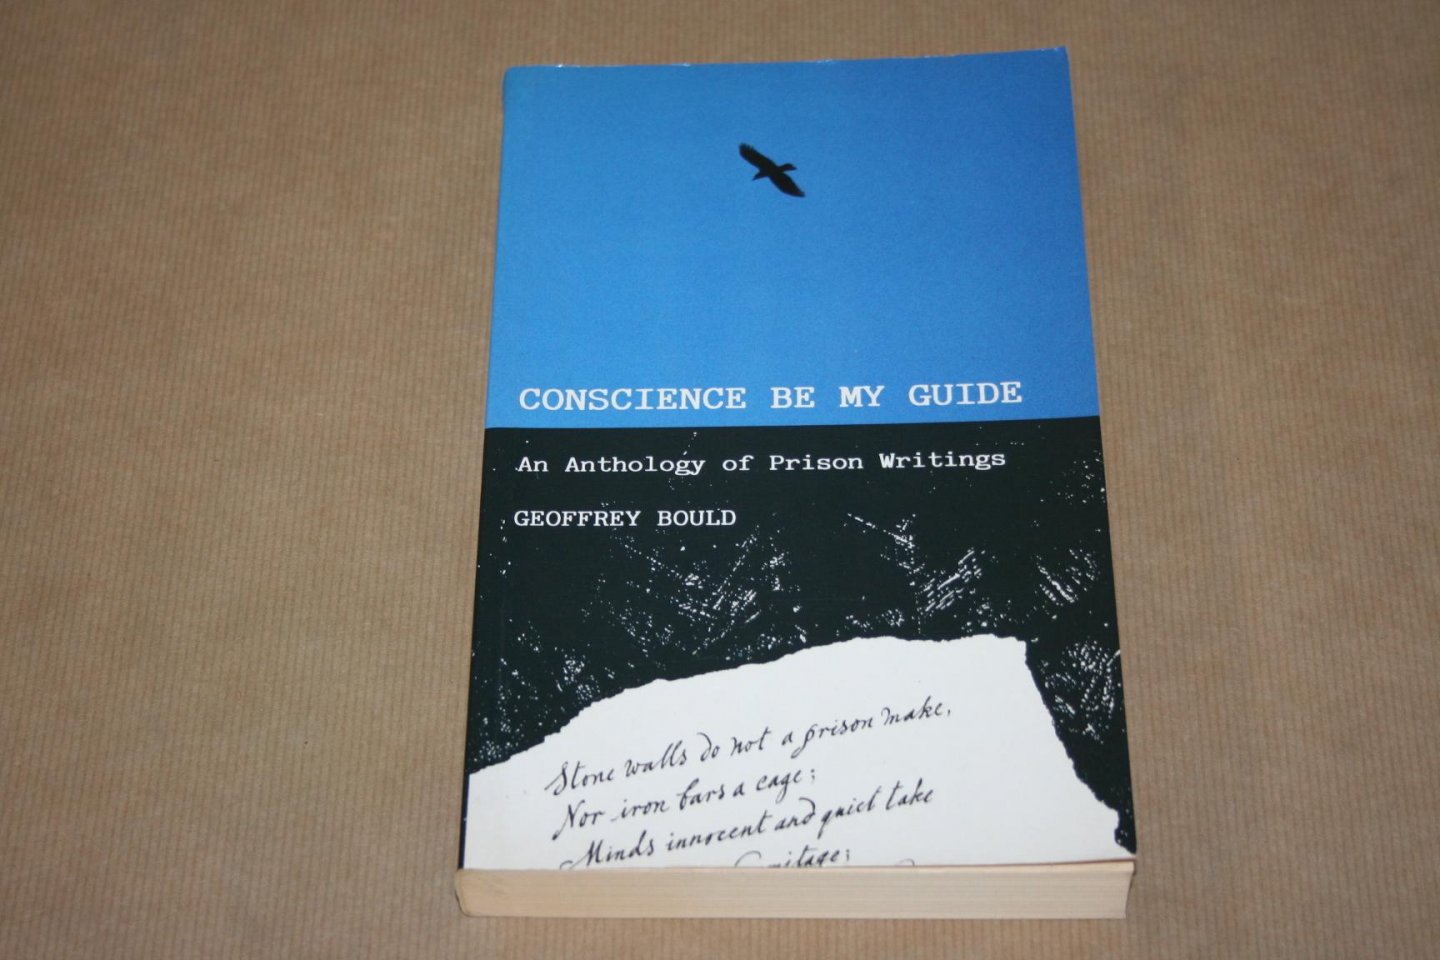 Edited by Geoffrey Bould - Conscience be my guide --  An Anthology of Prison Writings